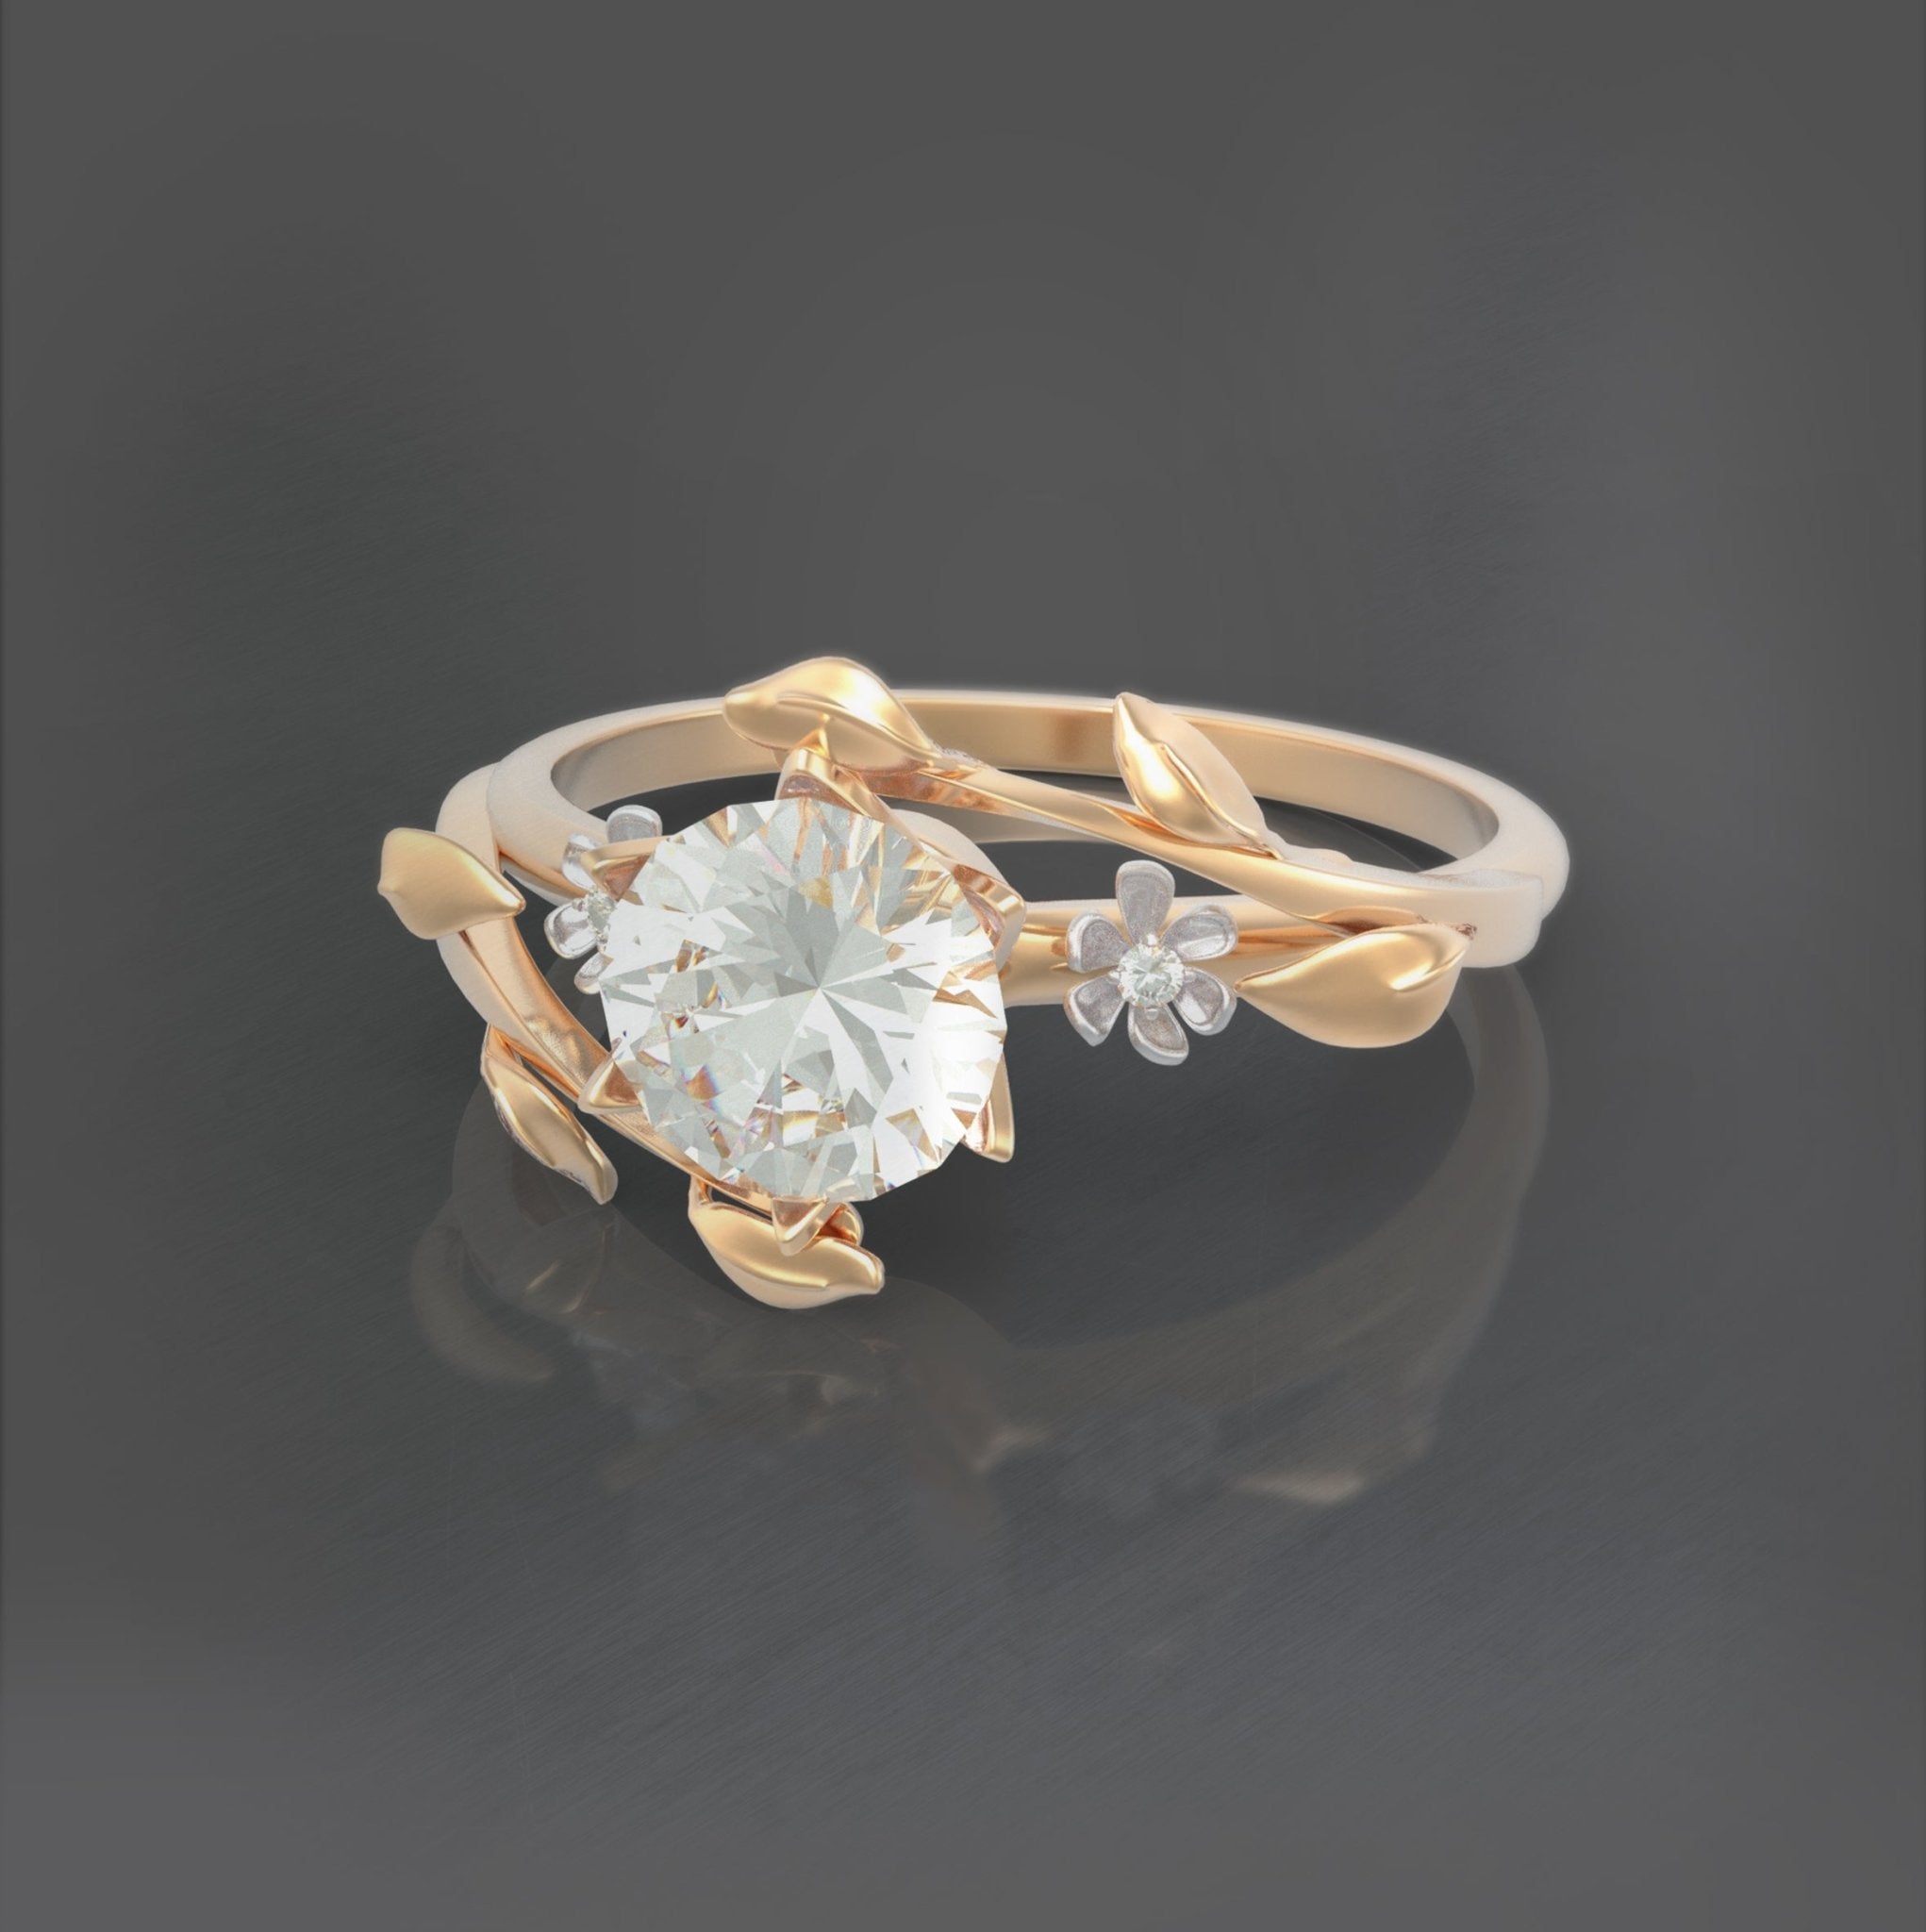 Unique Symmetrical Flowers and Leaves Engagement Ring No.68 in Yellow Band/White Flowers Gold - Moissanite/Diamond - Roelavi